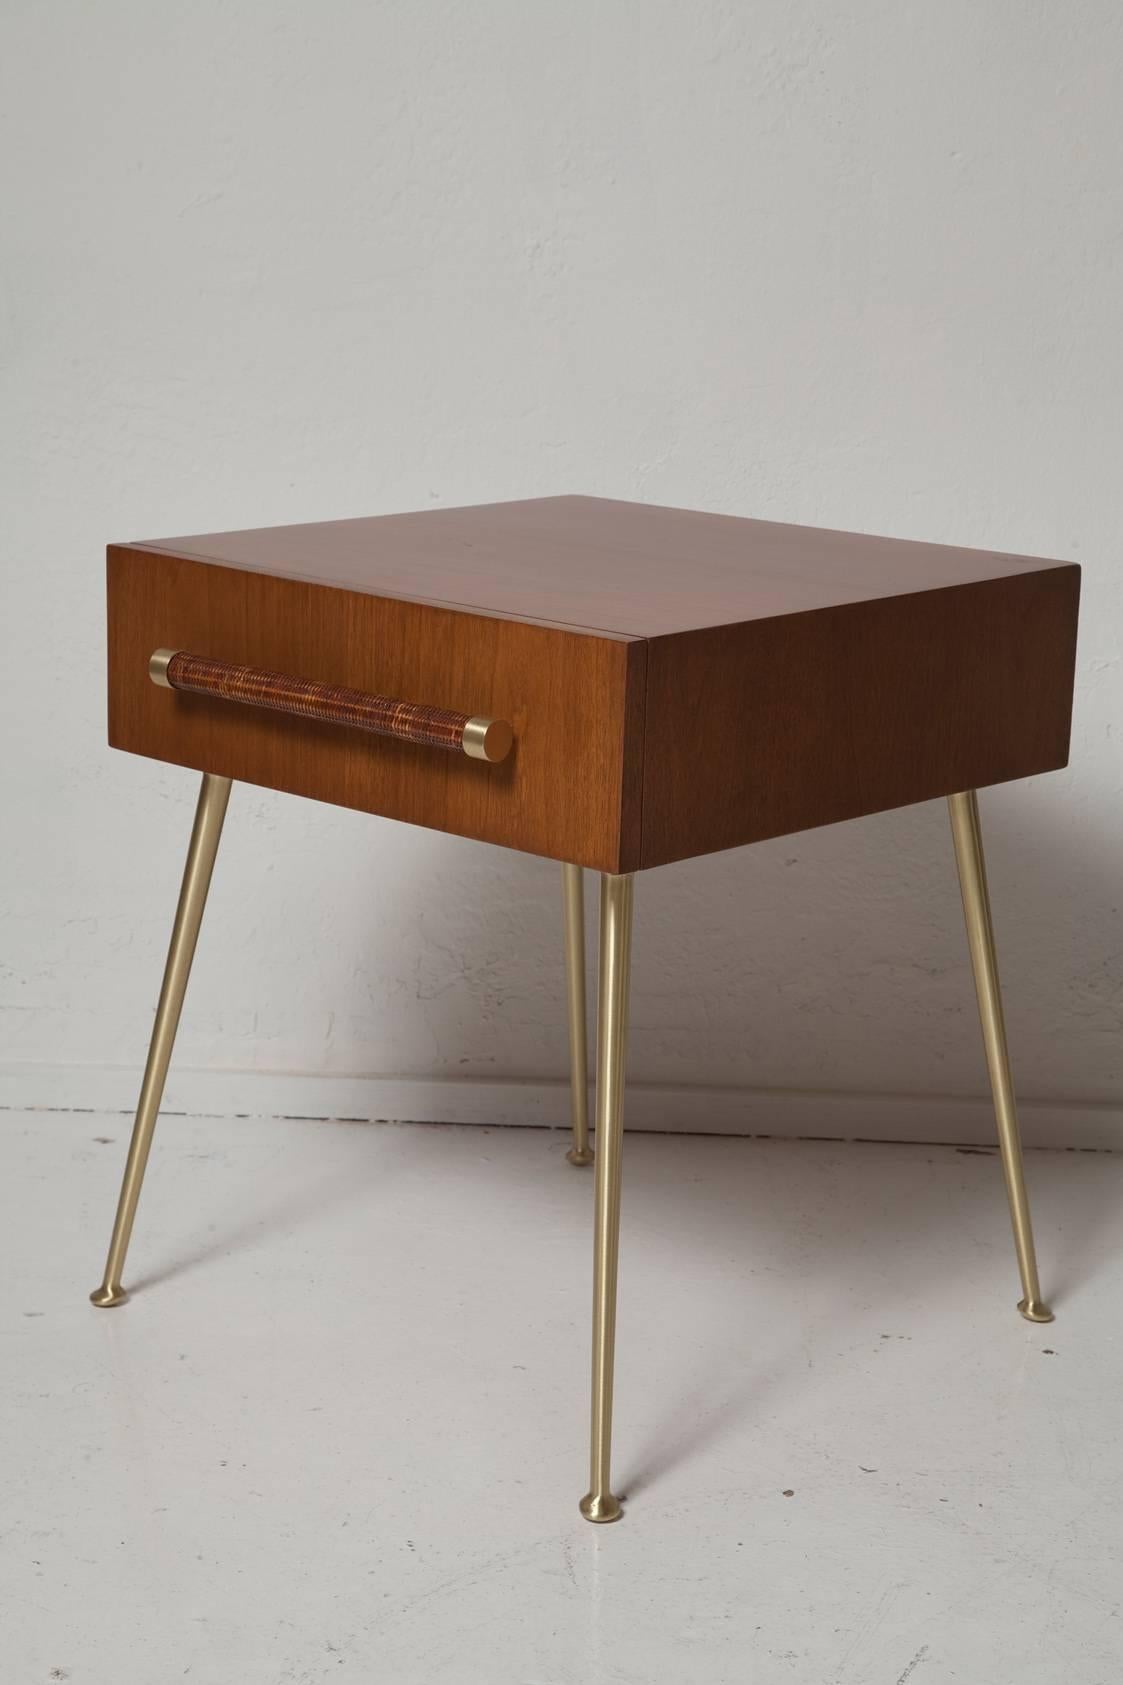 Brushed Fully Restored End Tables or Nightstands by T.H. Robsjohn-Gibbings for Widdicomb